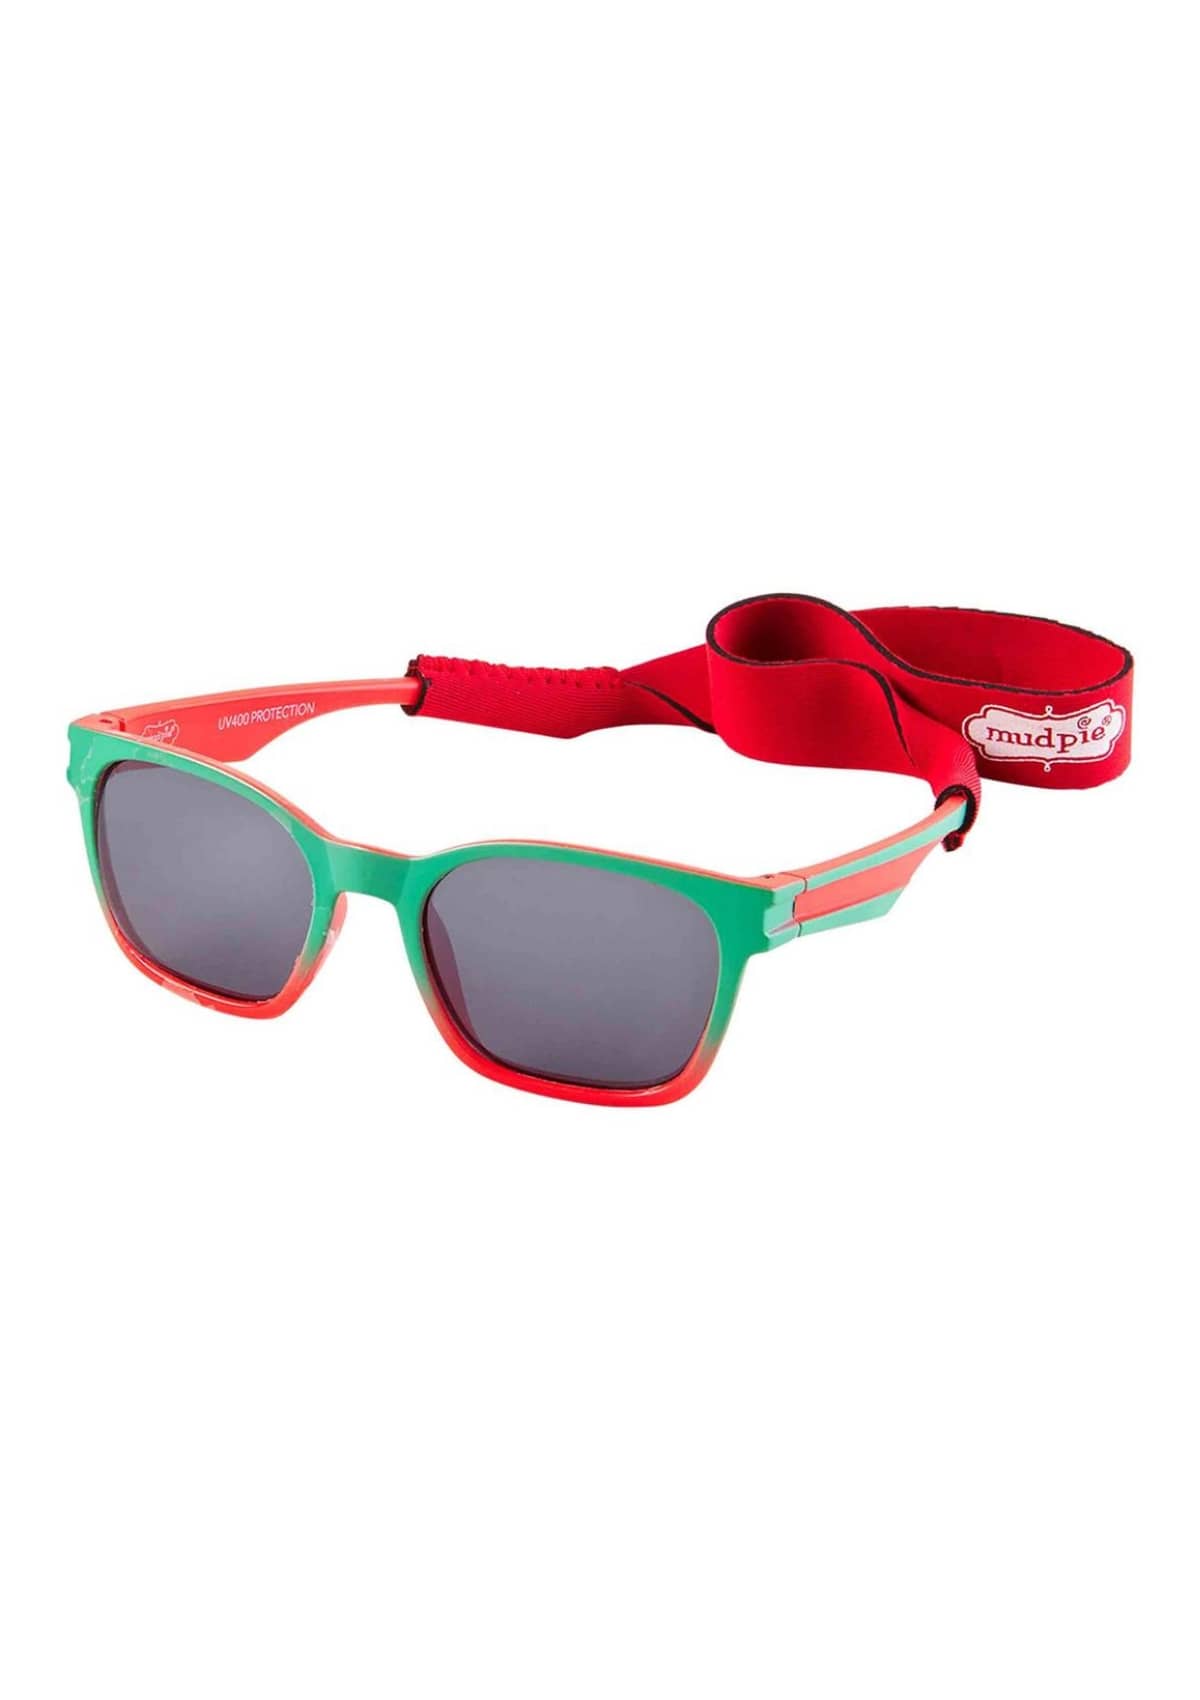 Red Green Toddler Sunglasses -Mud Pie / One Coas- Ruby Jane-